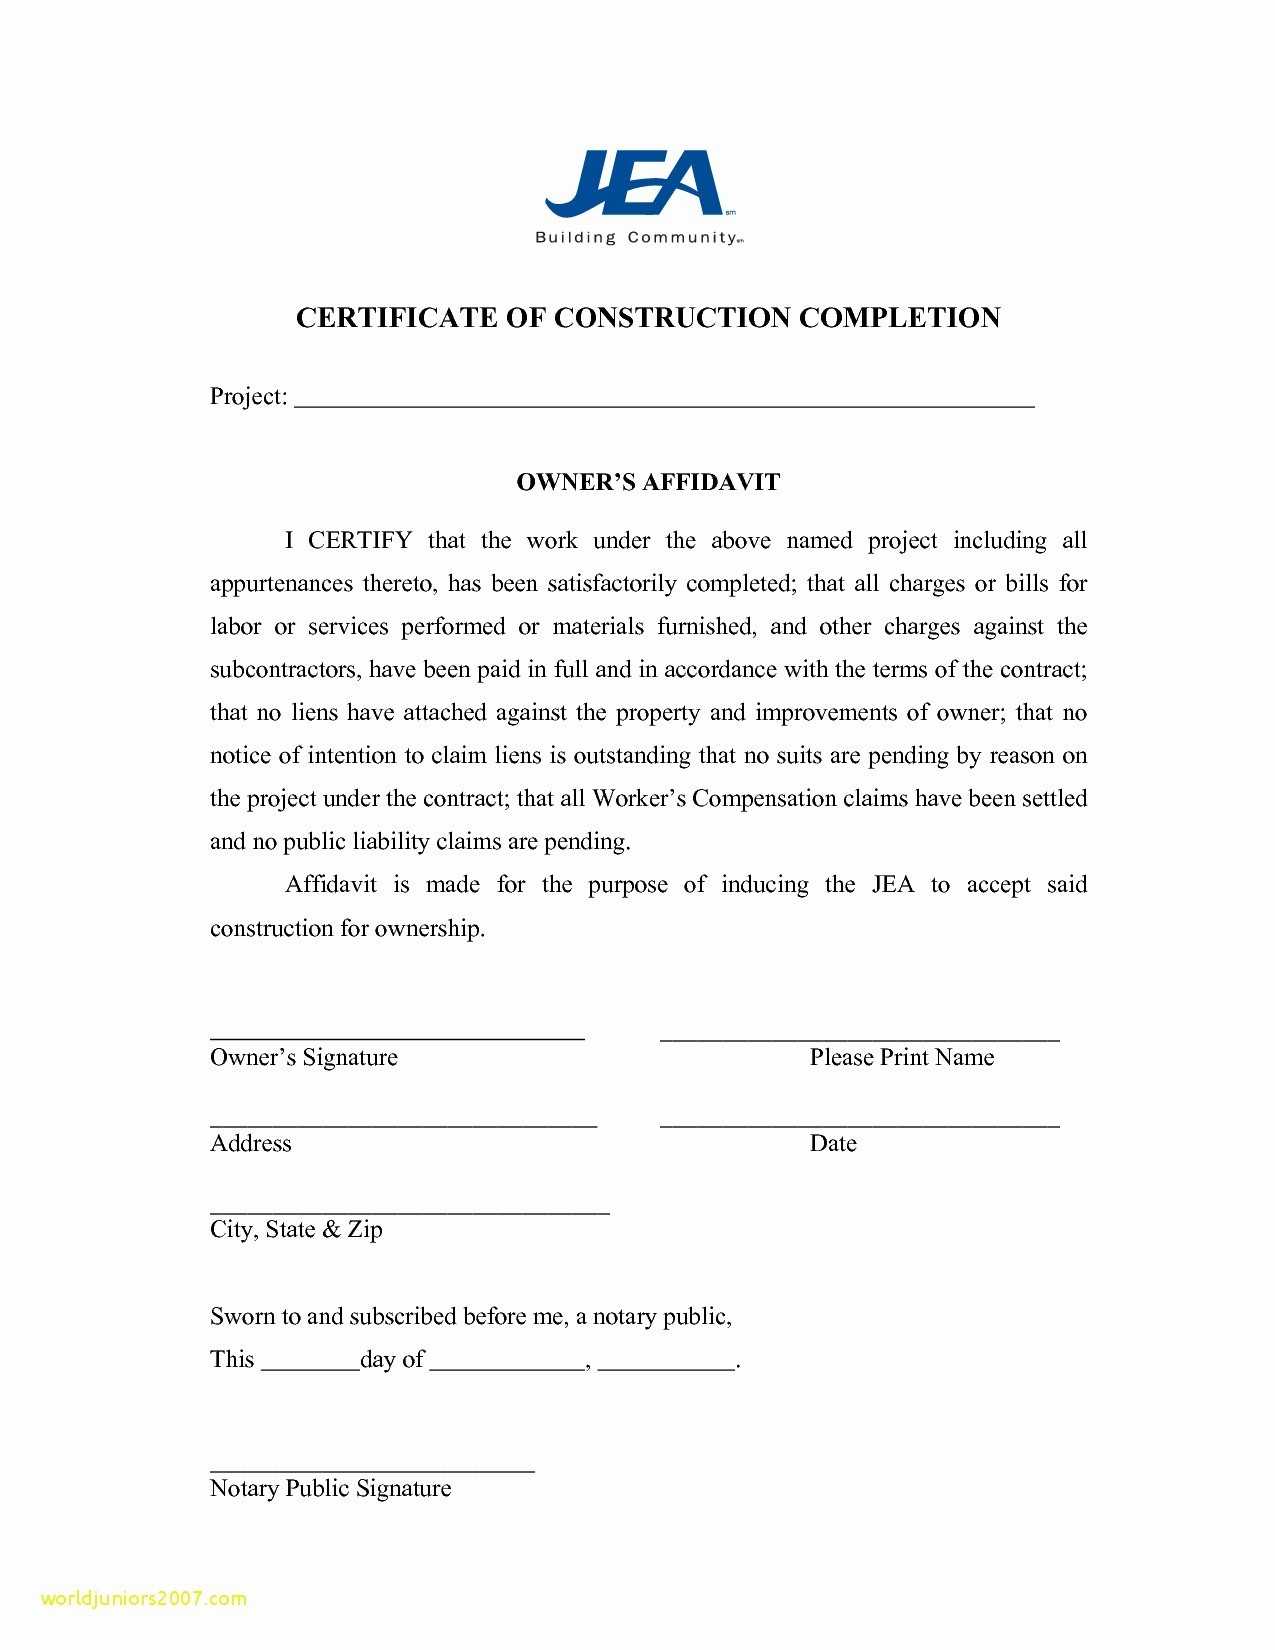 Letter Of Substantial Completion Template Examples | Letter In Practical Completion Certificate Template Jct